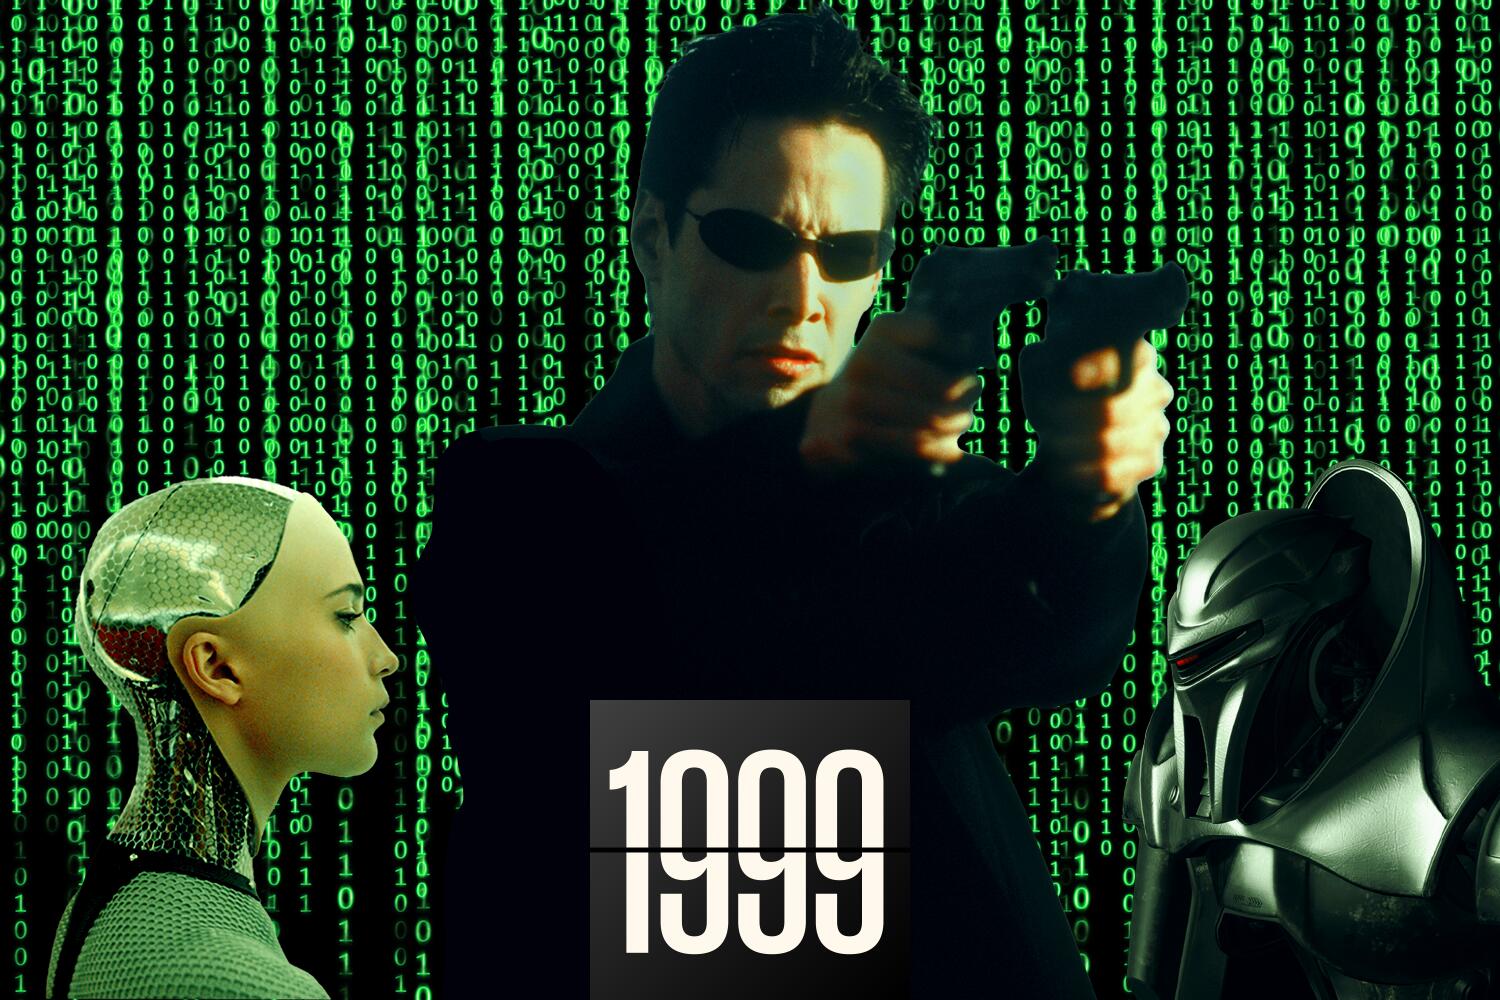 The movies went soft on AI. The Matrix reminds us why its so dangerous